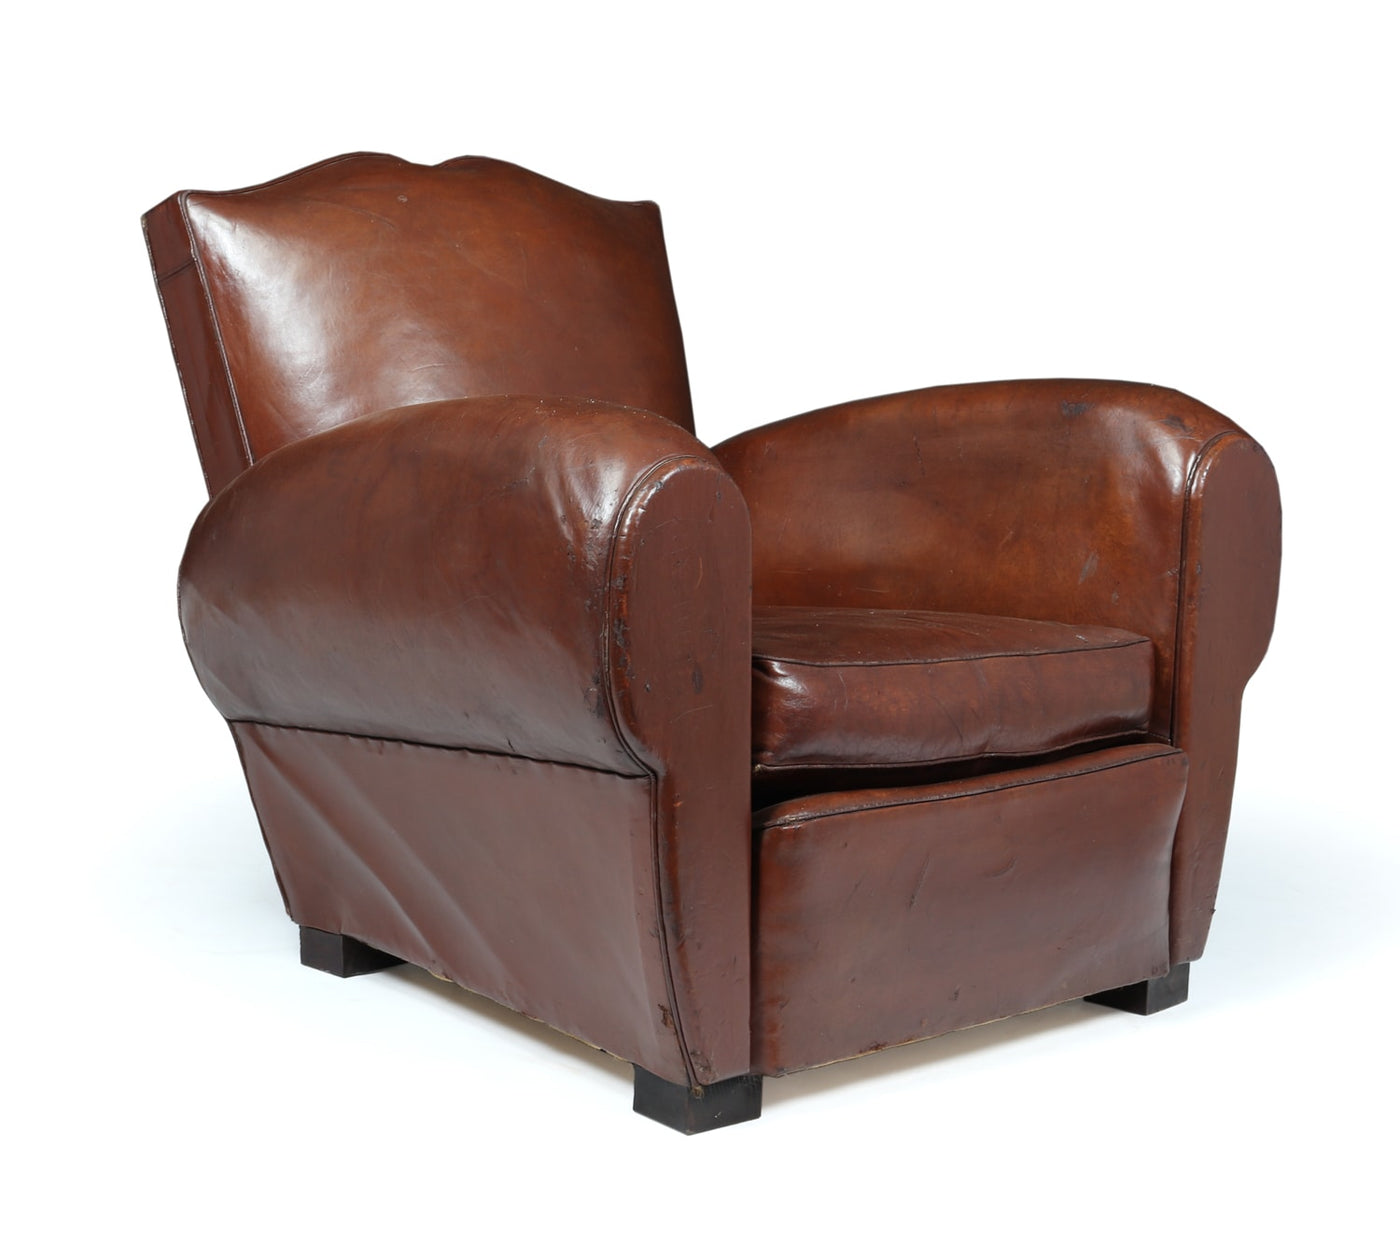 Original French Leather Moustache Back Club Chair c1940